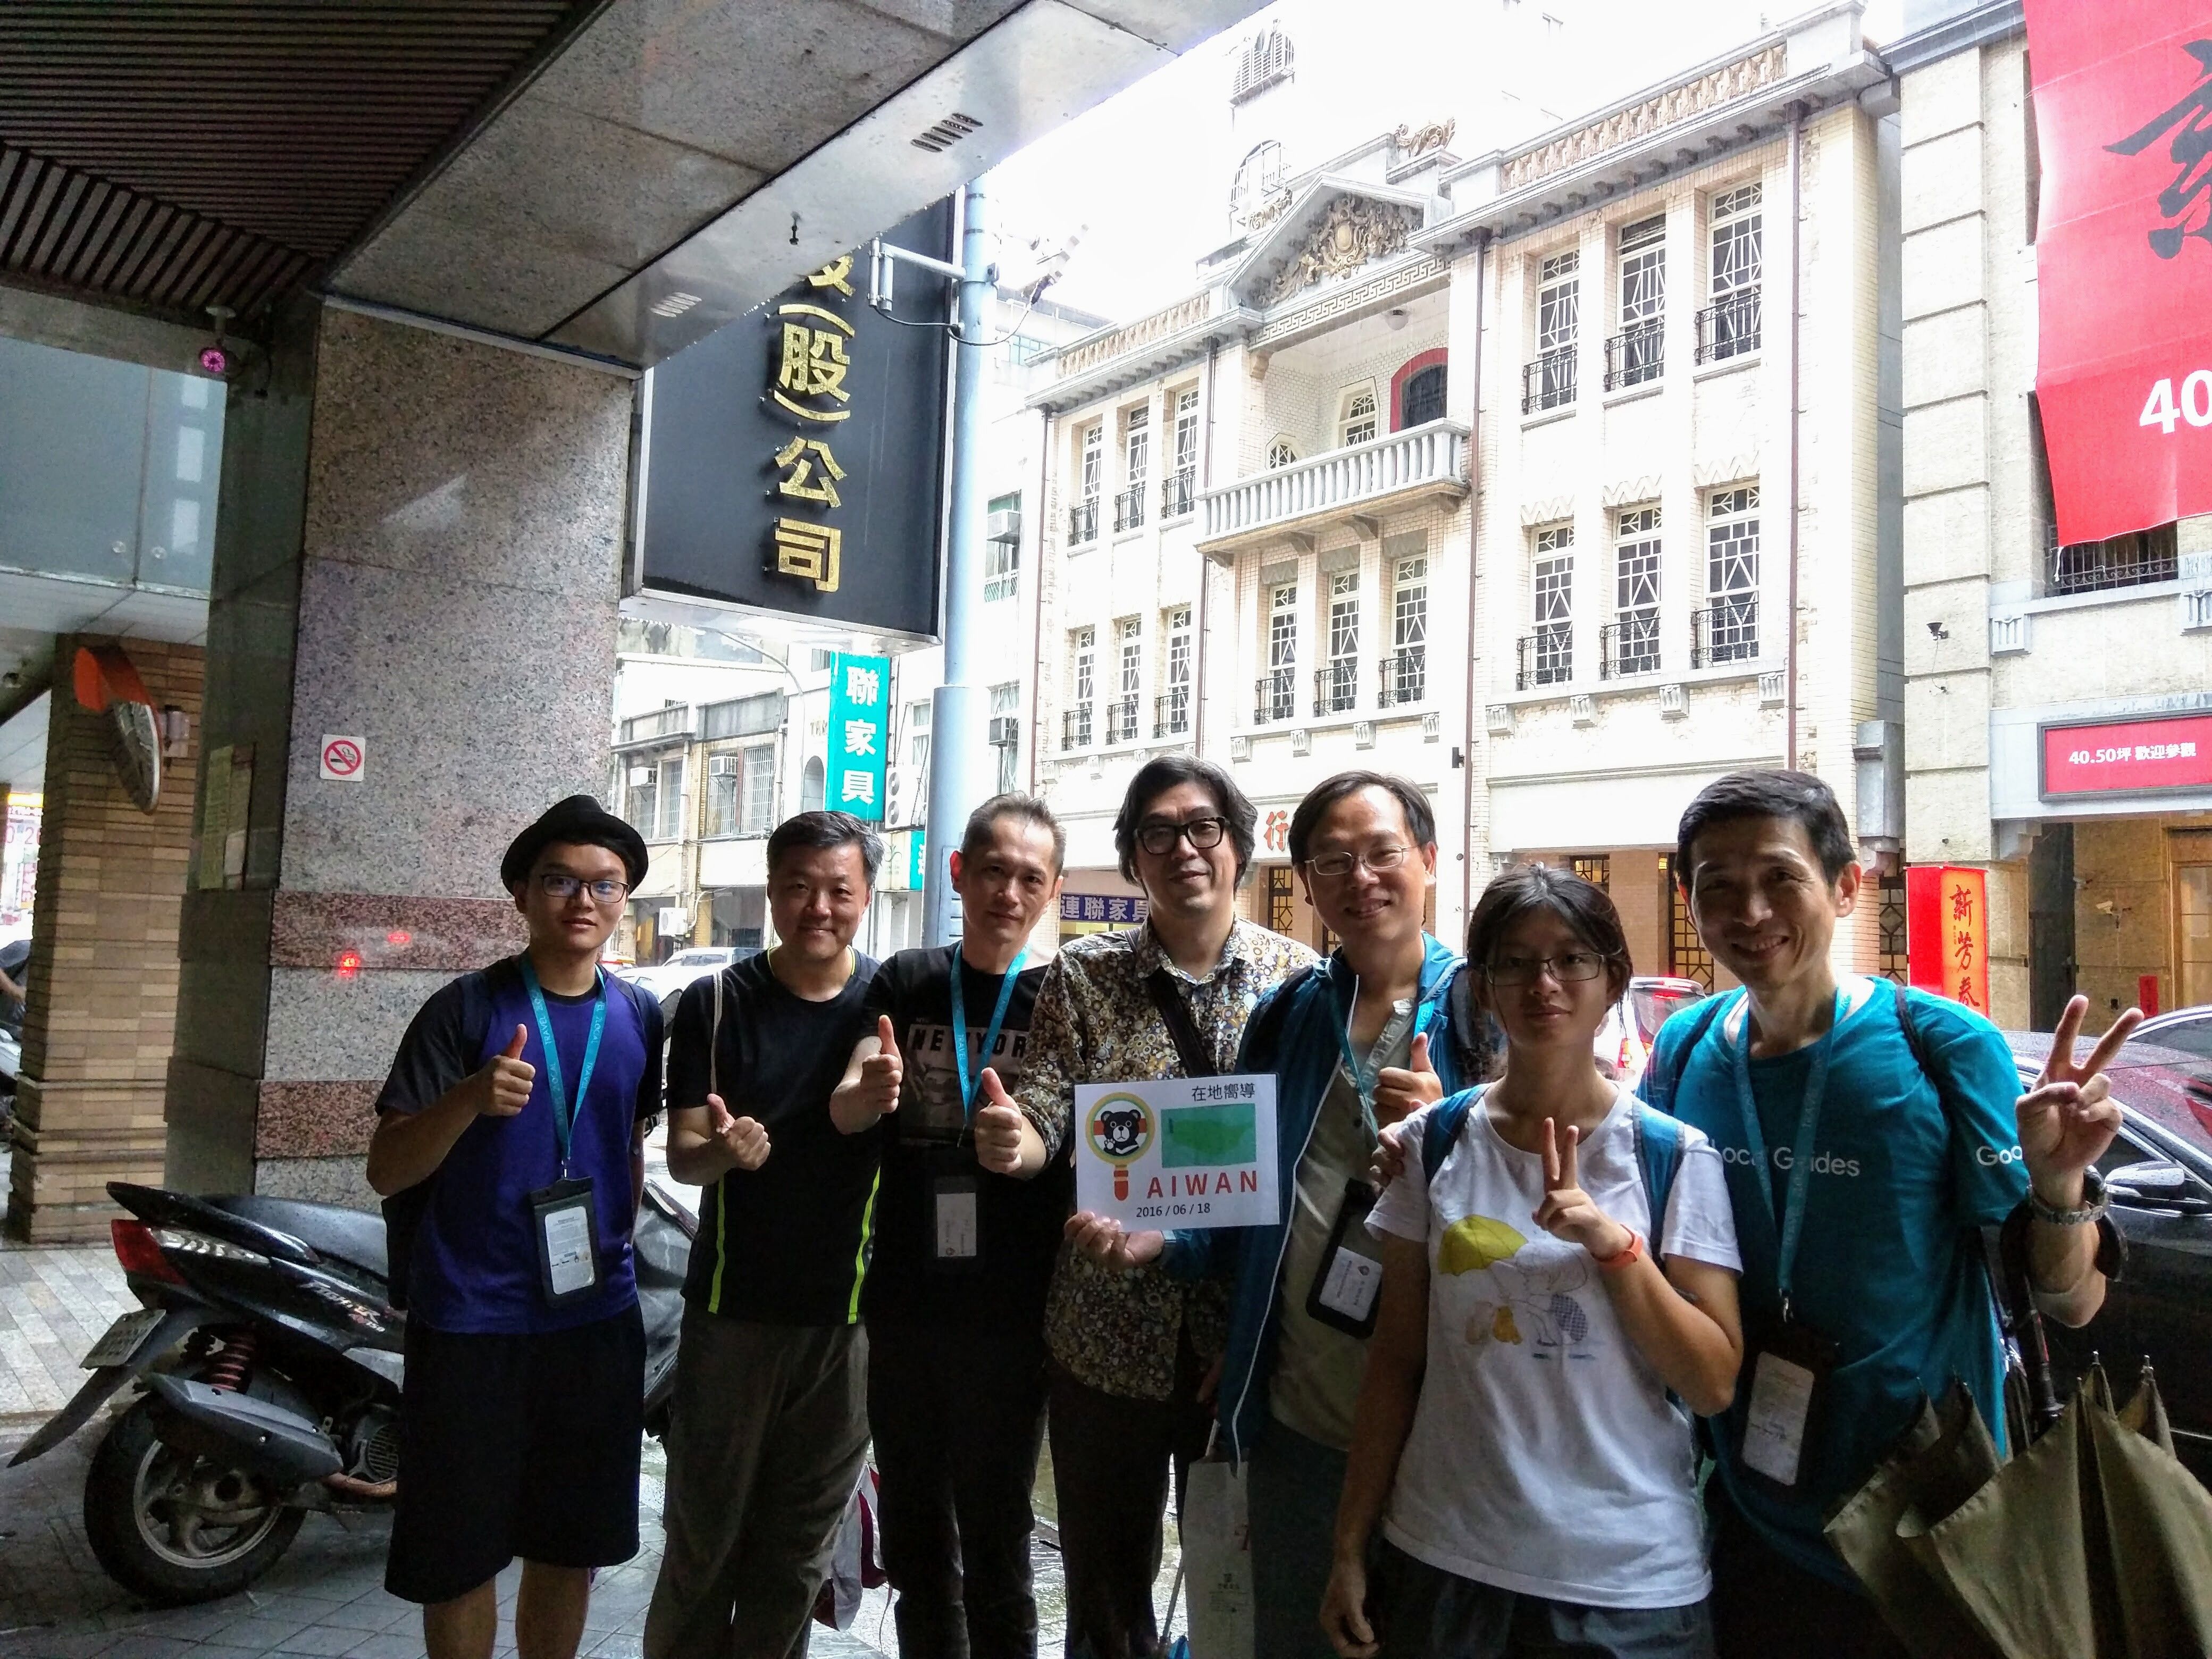 Caption: A group photo from the first Local Guides meet-up Sampson ever attended, which was organized by a Taiwan Local Guides Community in June 2016 (Local Guide @SampsonF)